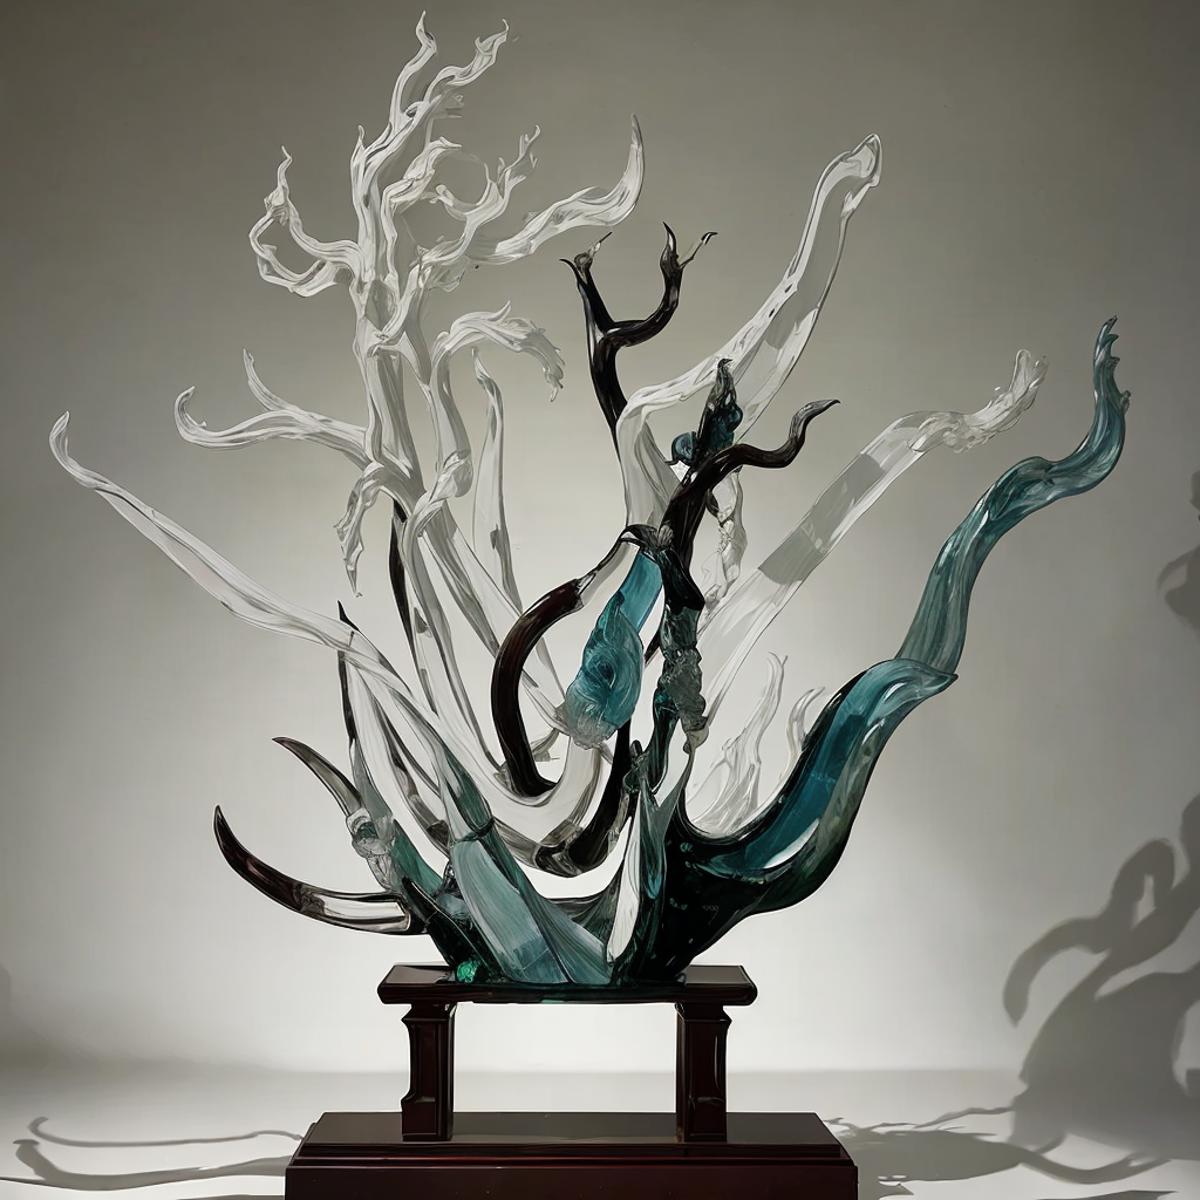 Glass Art and Glass Sculptures image by Jabberwocky207